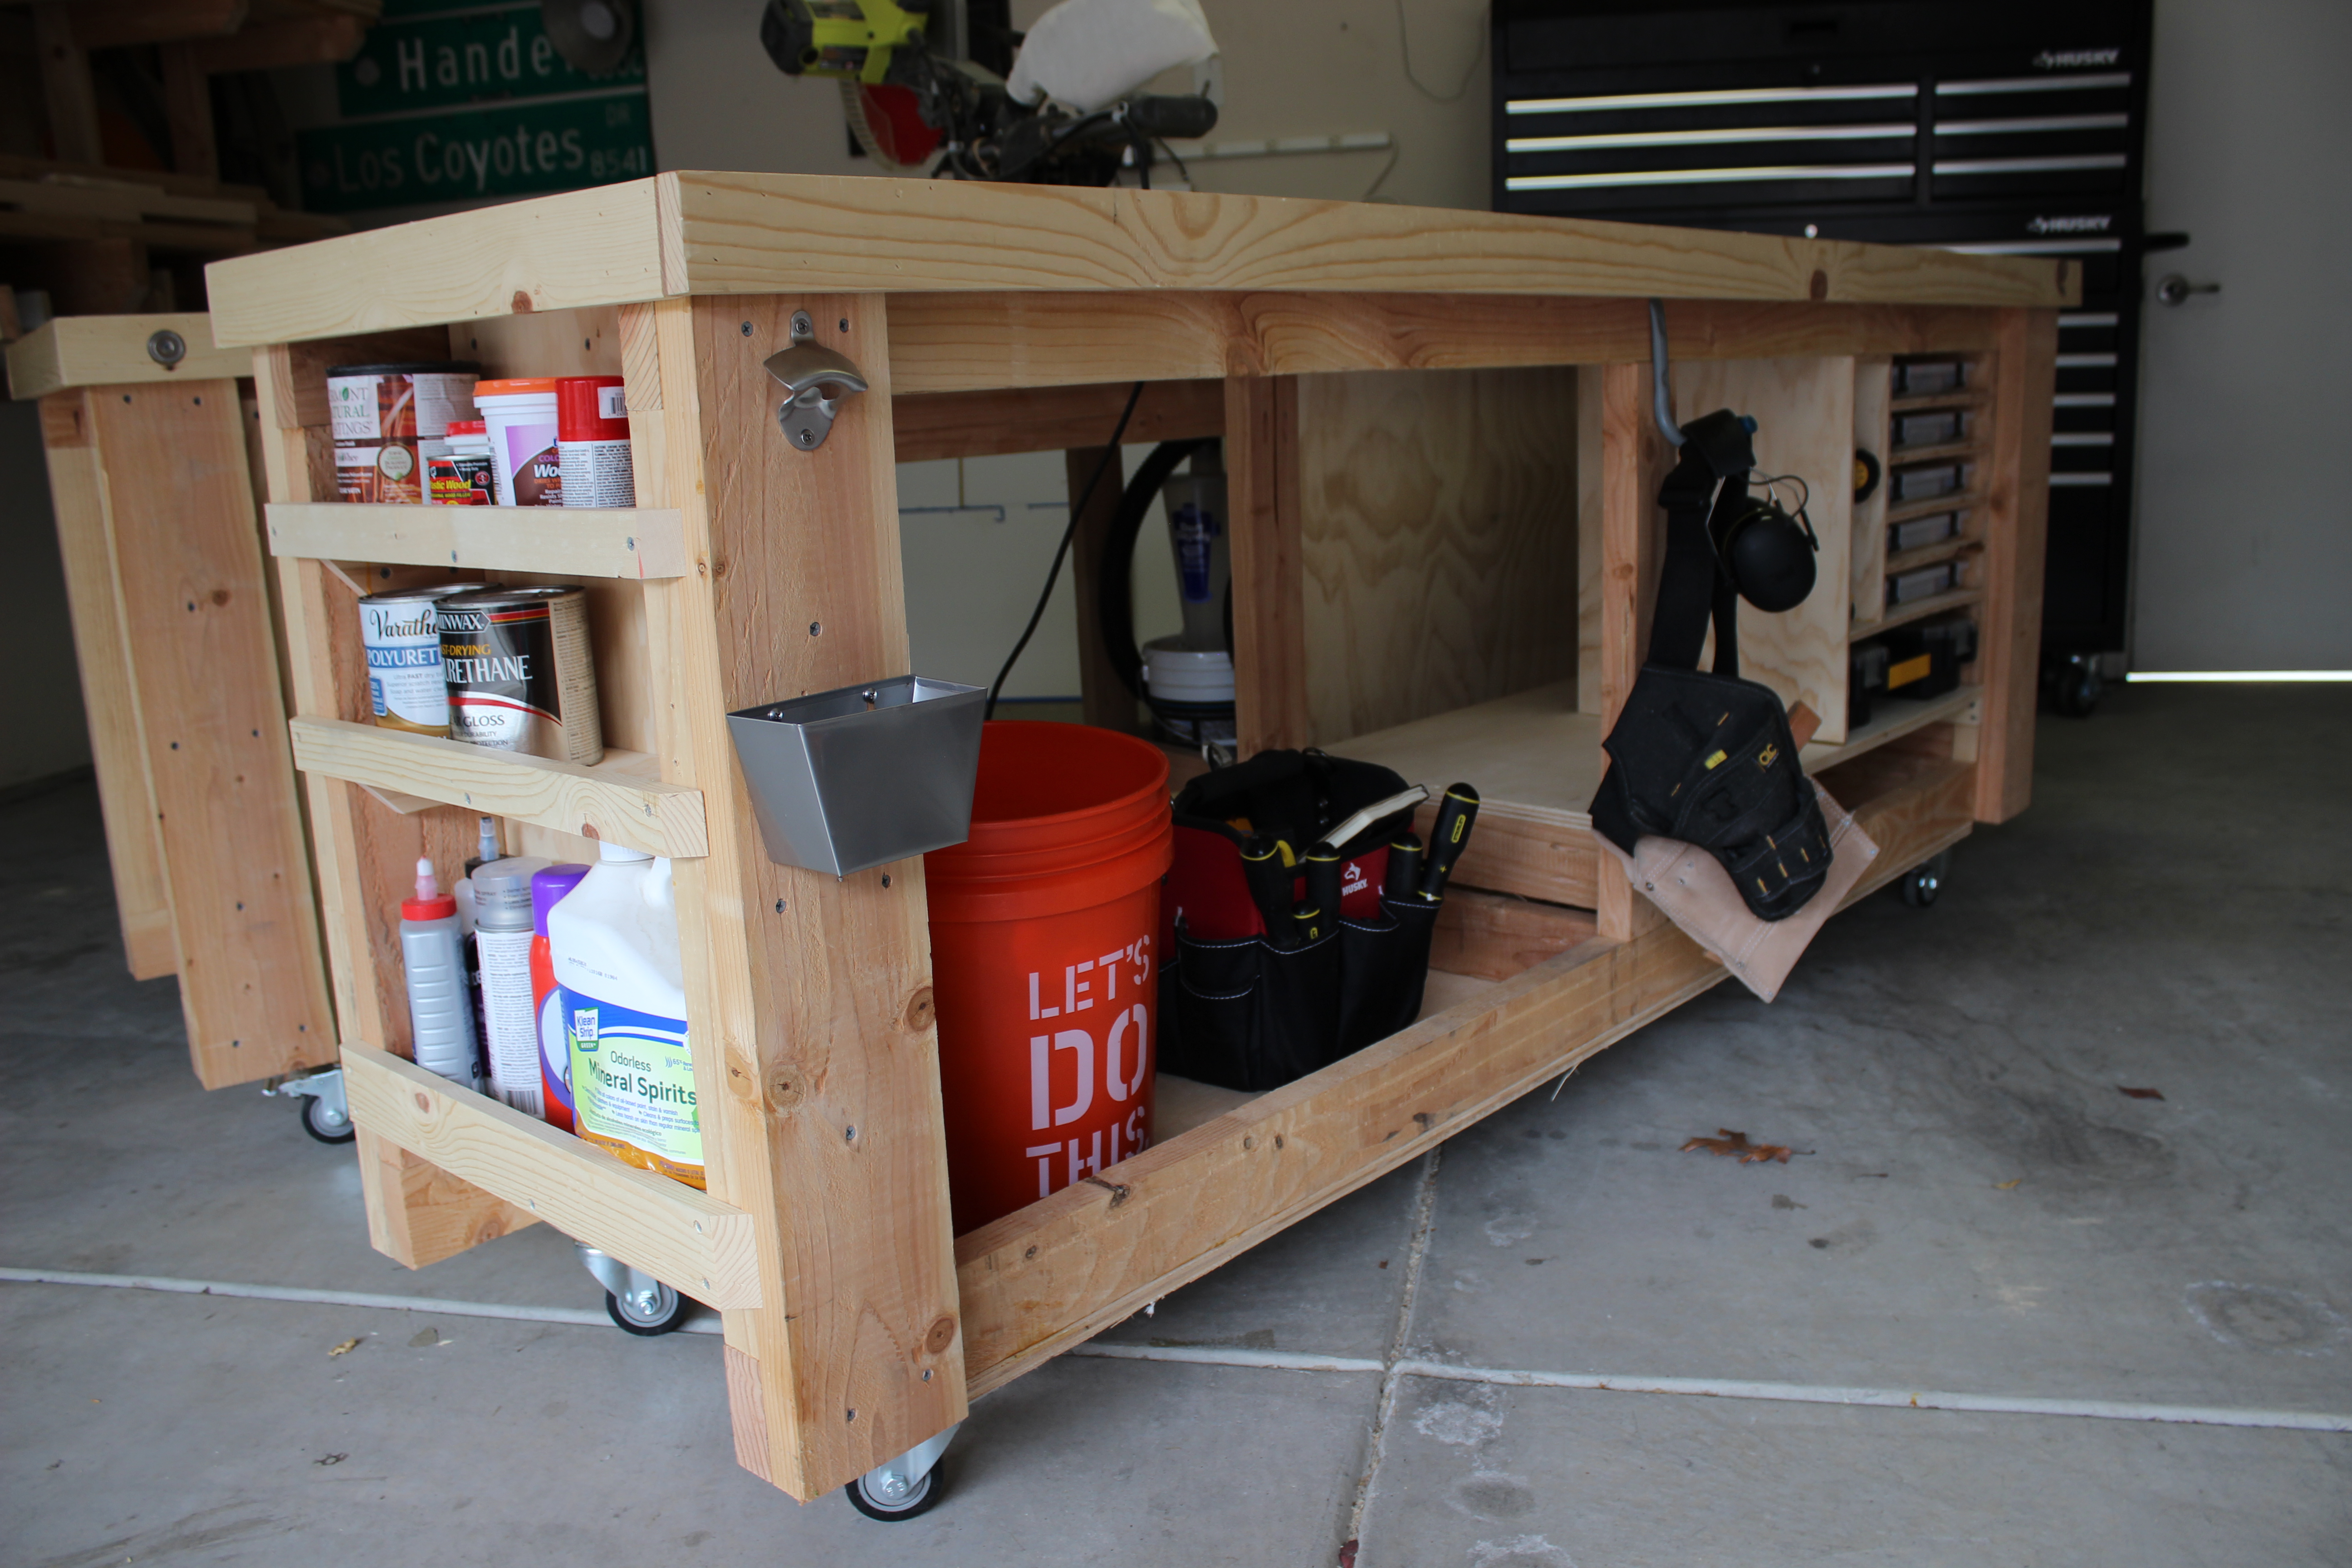 Side view of mobile workbench with shelves and storage